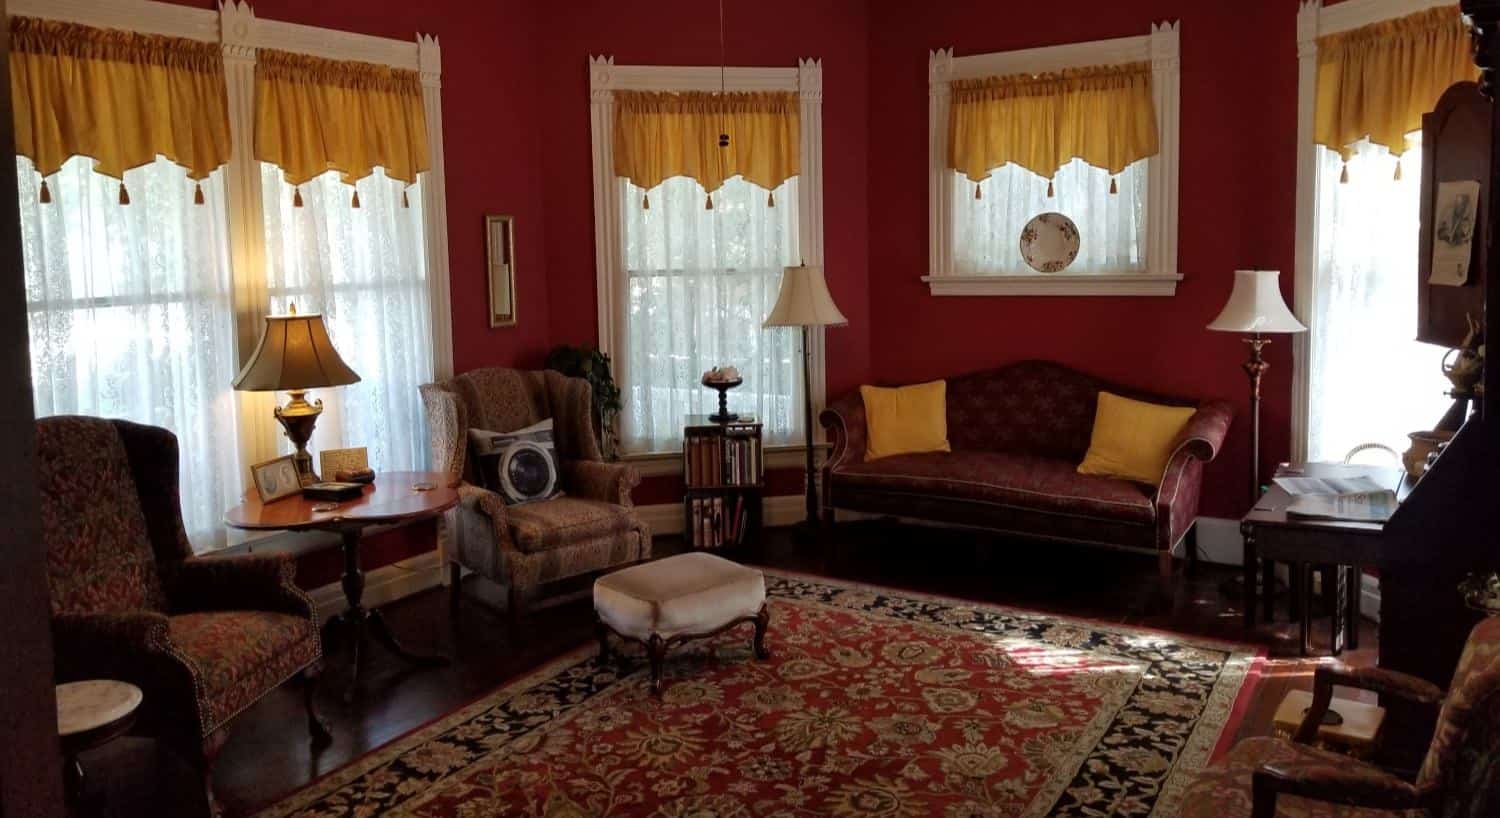 Large room with burgundy walls, dark hardwood floors, area rug, Victorian chairs and sofa, and many large windows